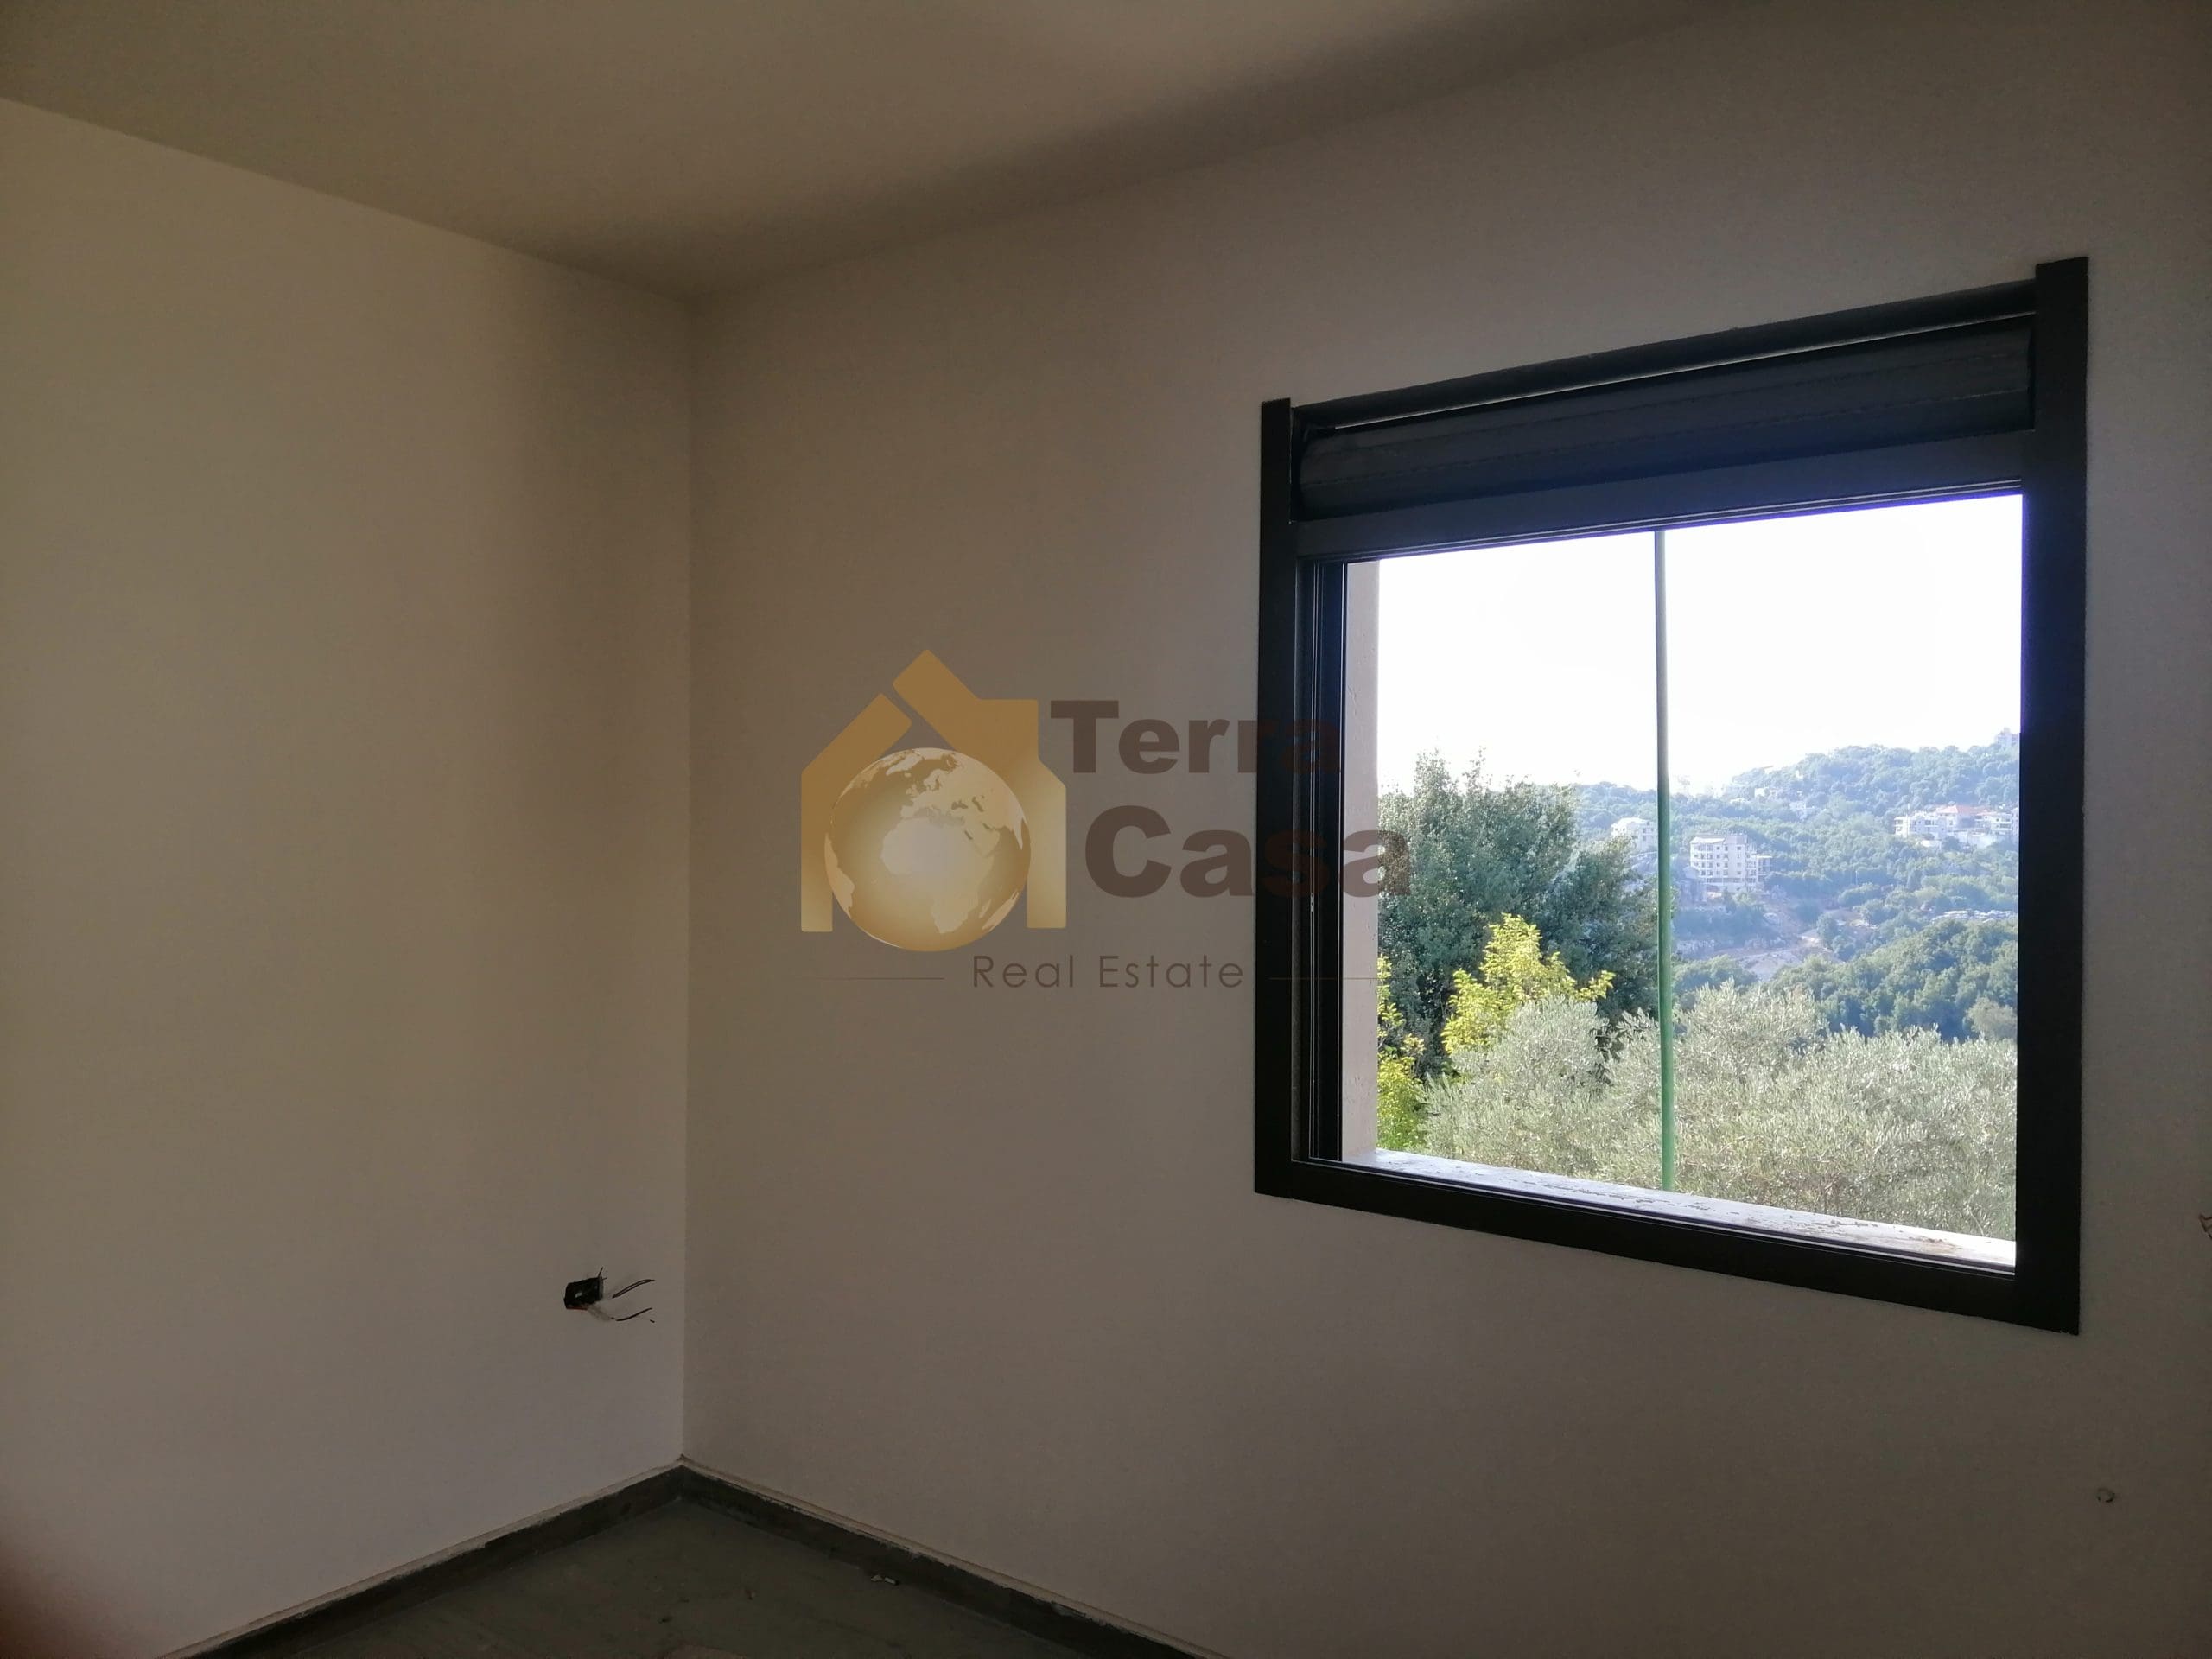 New apartment in Achkout consisting of 135sqm located in nice area offered for 175000$